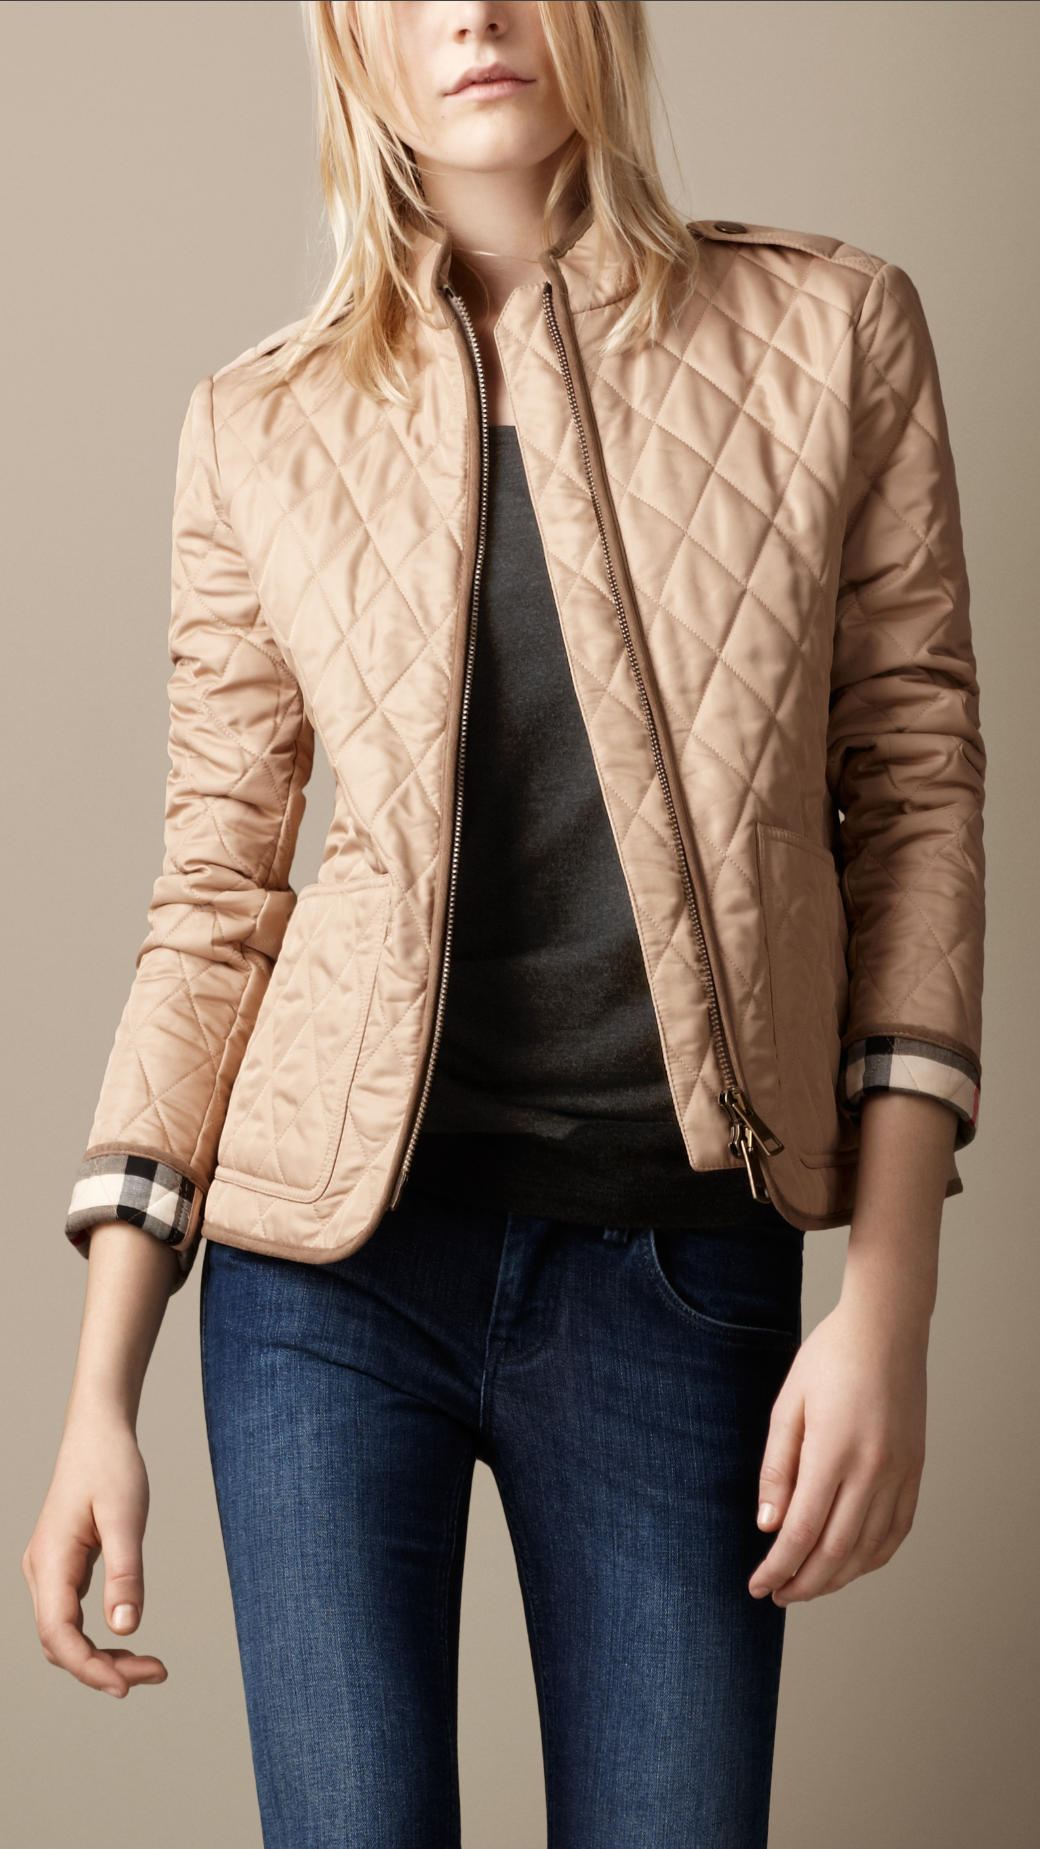 Lyst - Burberry Brit Diamond Quilted Jacket in Natural